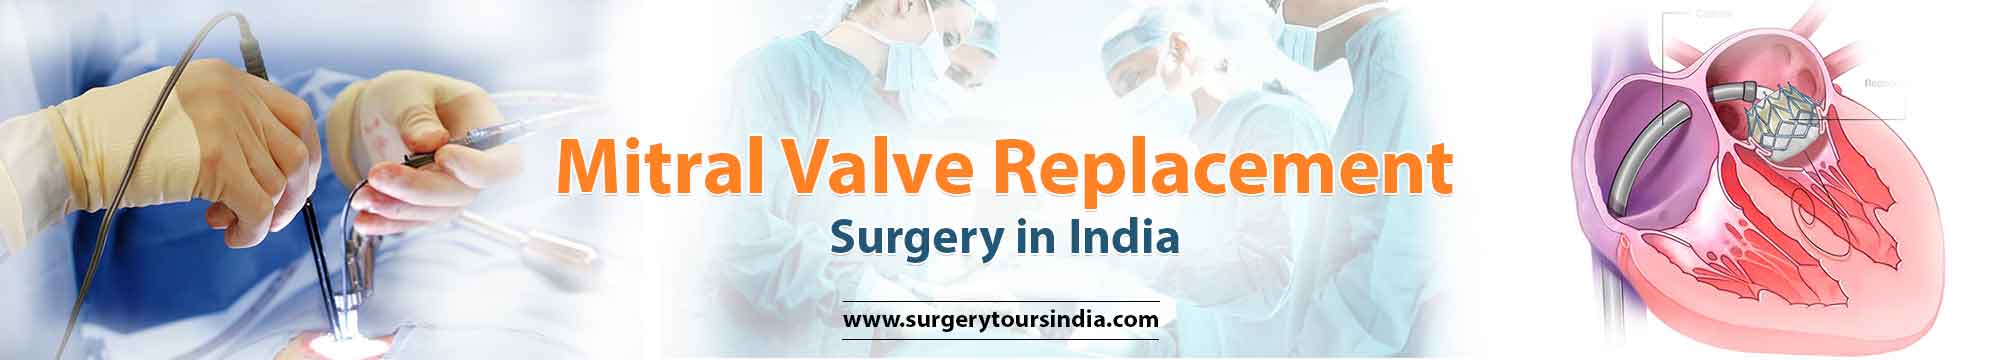 Mitral Valve Replacement Surgery